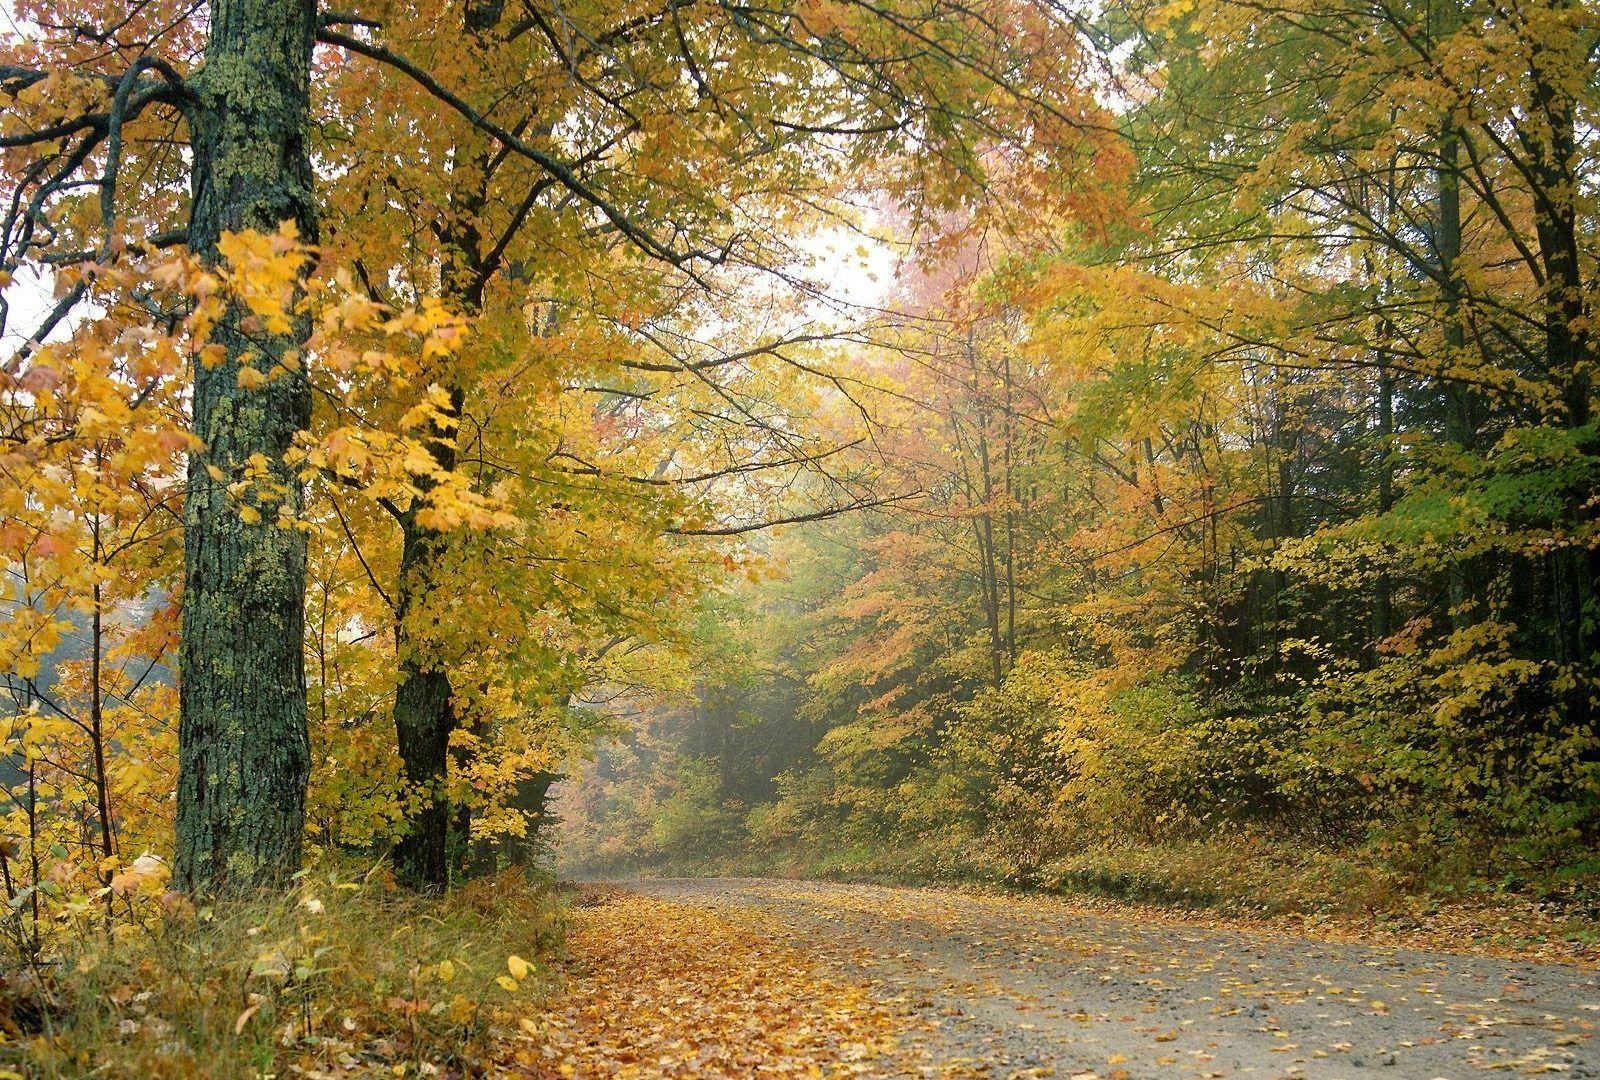 Forest: Light Tree Autumn Forest Vermont Leaf Afternoon Road Crisp